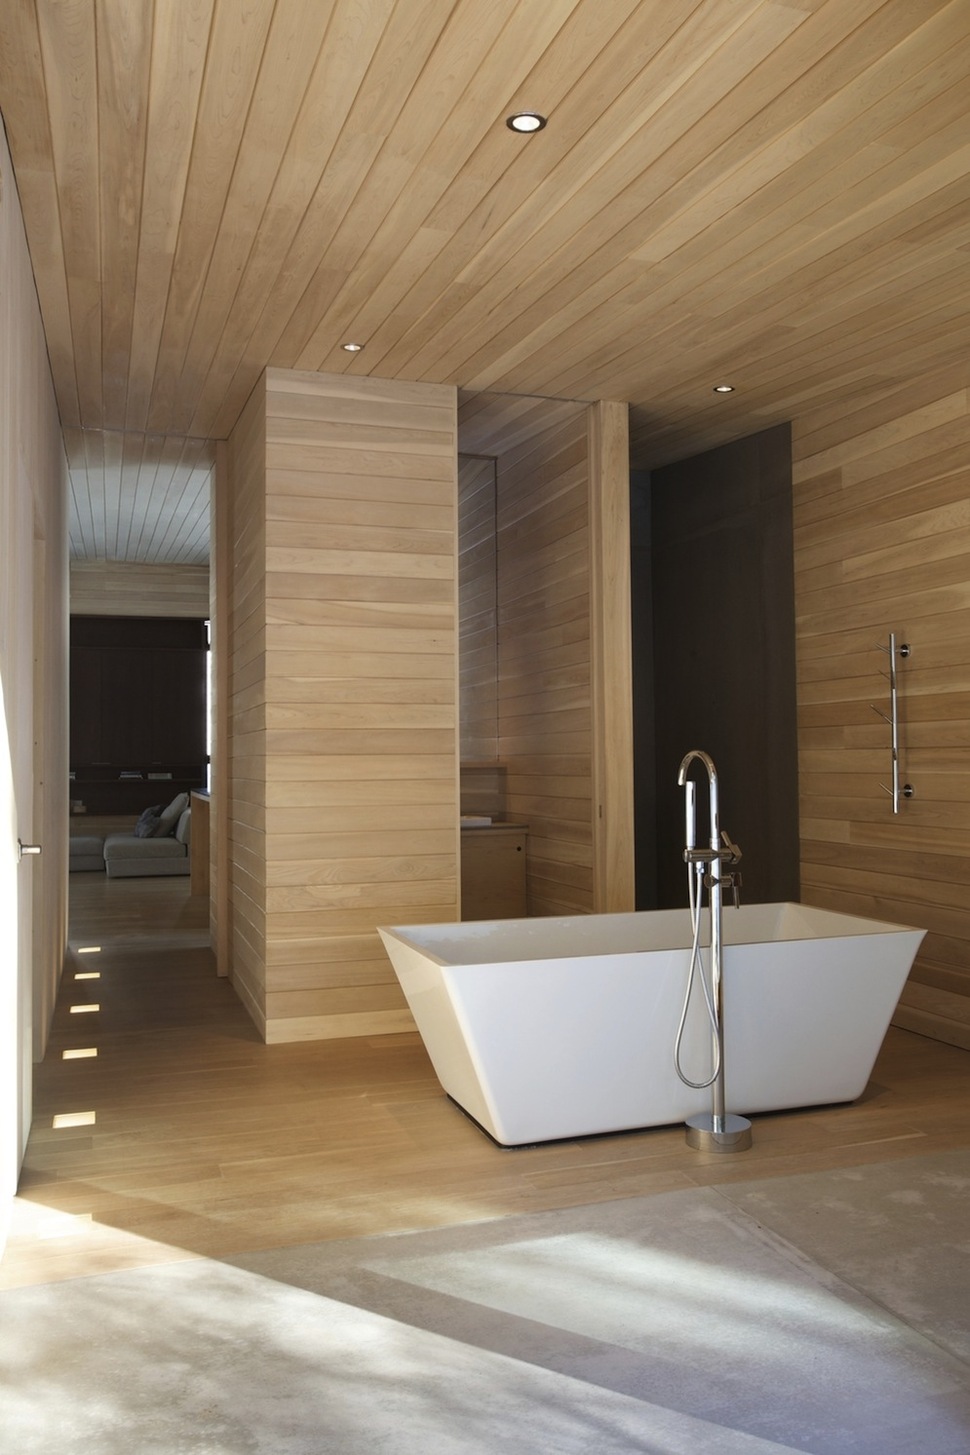 forest-getaway-cabin-dominated-by-warm-wood-boards-11-freestanding-tub.jpg